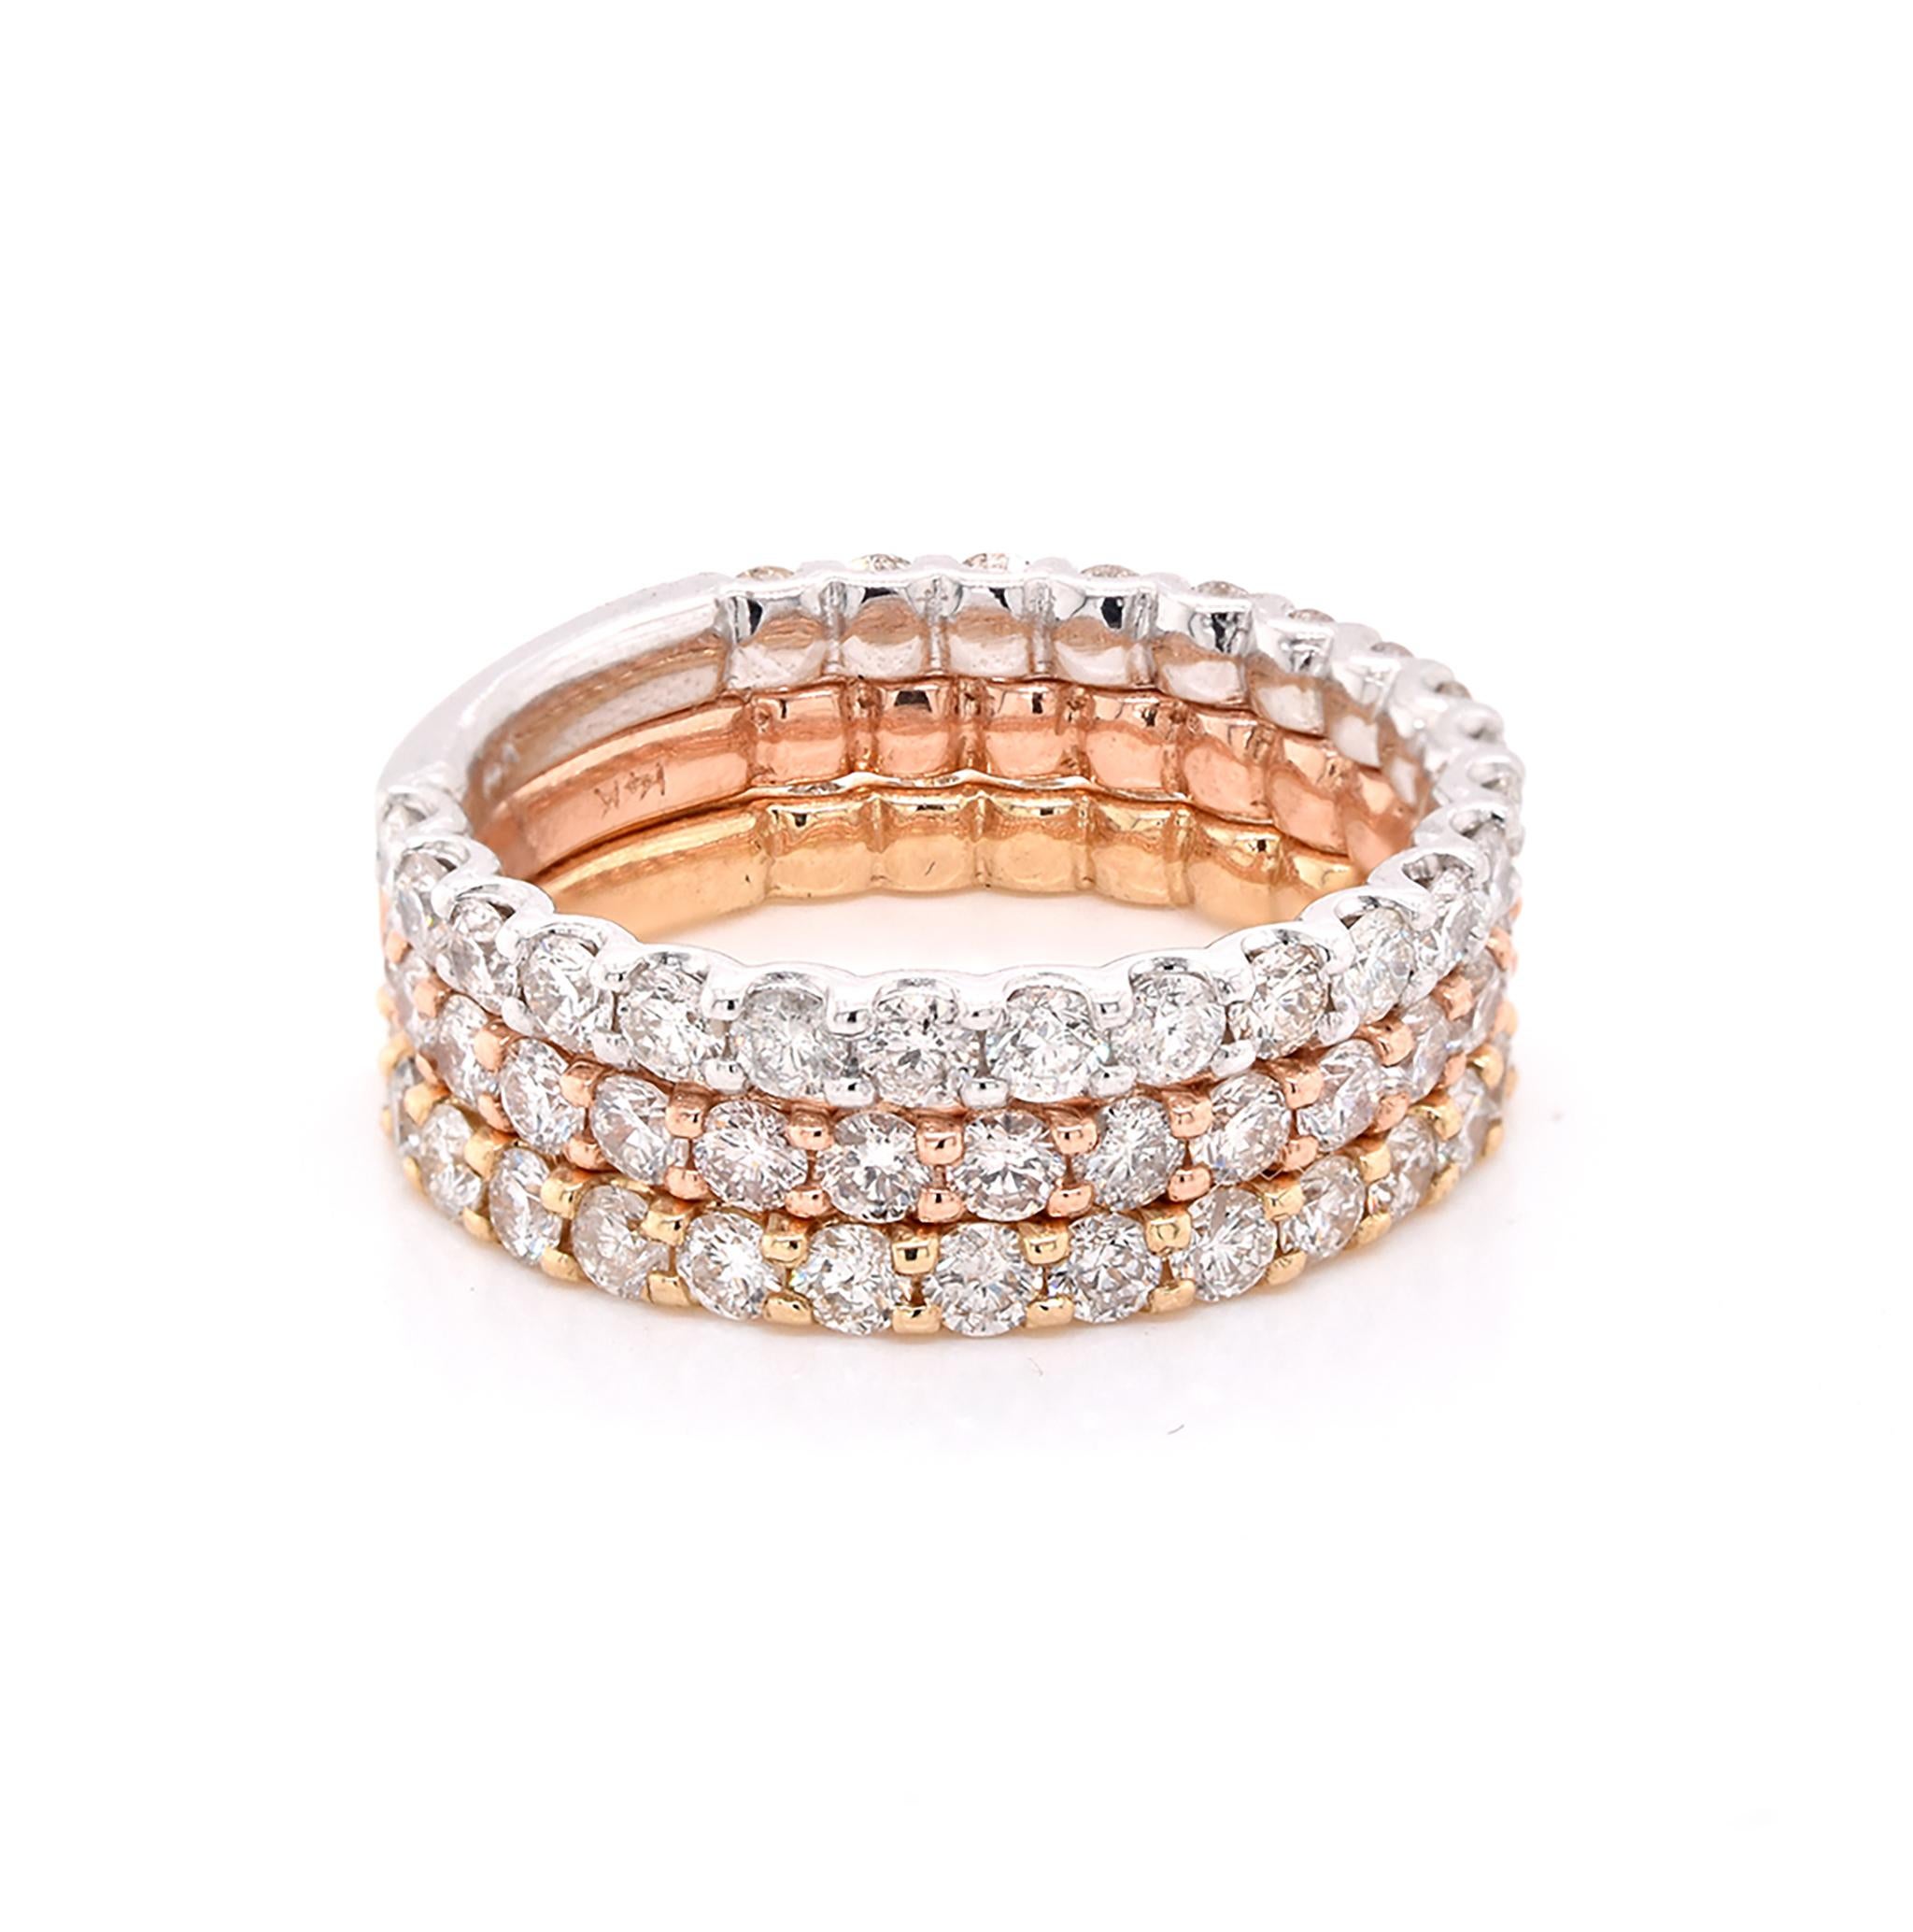 Material: 14K white, yellow, and rose
Diamonds: 69 round cut = 2.39cttw
Color: G
Clarity: VS
Ring Size: 6.5 (please allow up to 2 additional business days for sizing requests)
Dimensions: rings individually measures 2.1mm wide
Weight: 4.44 grams